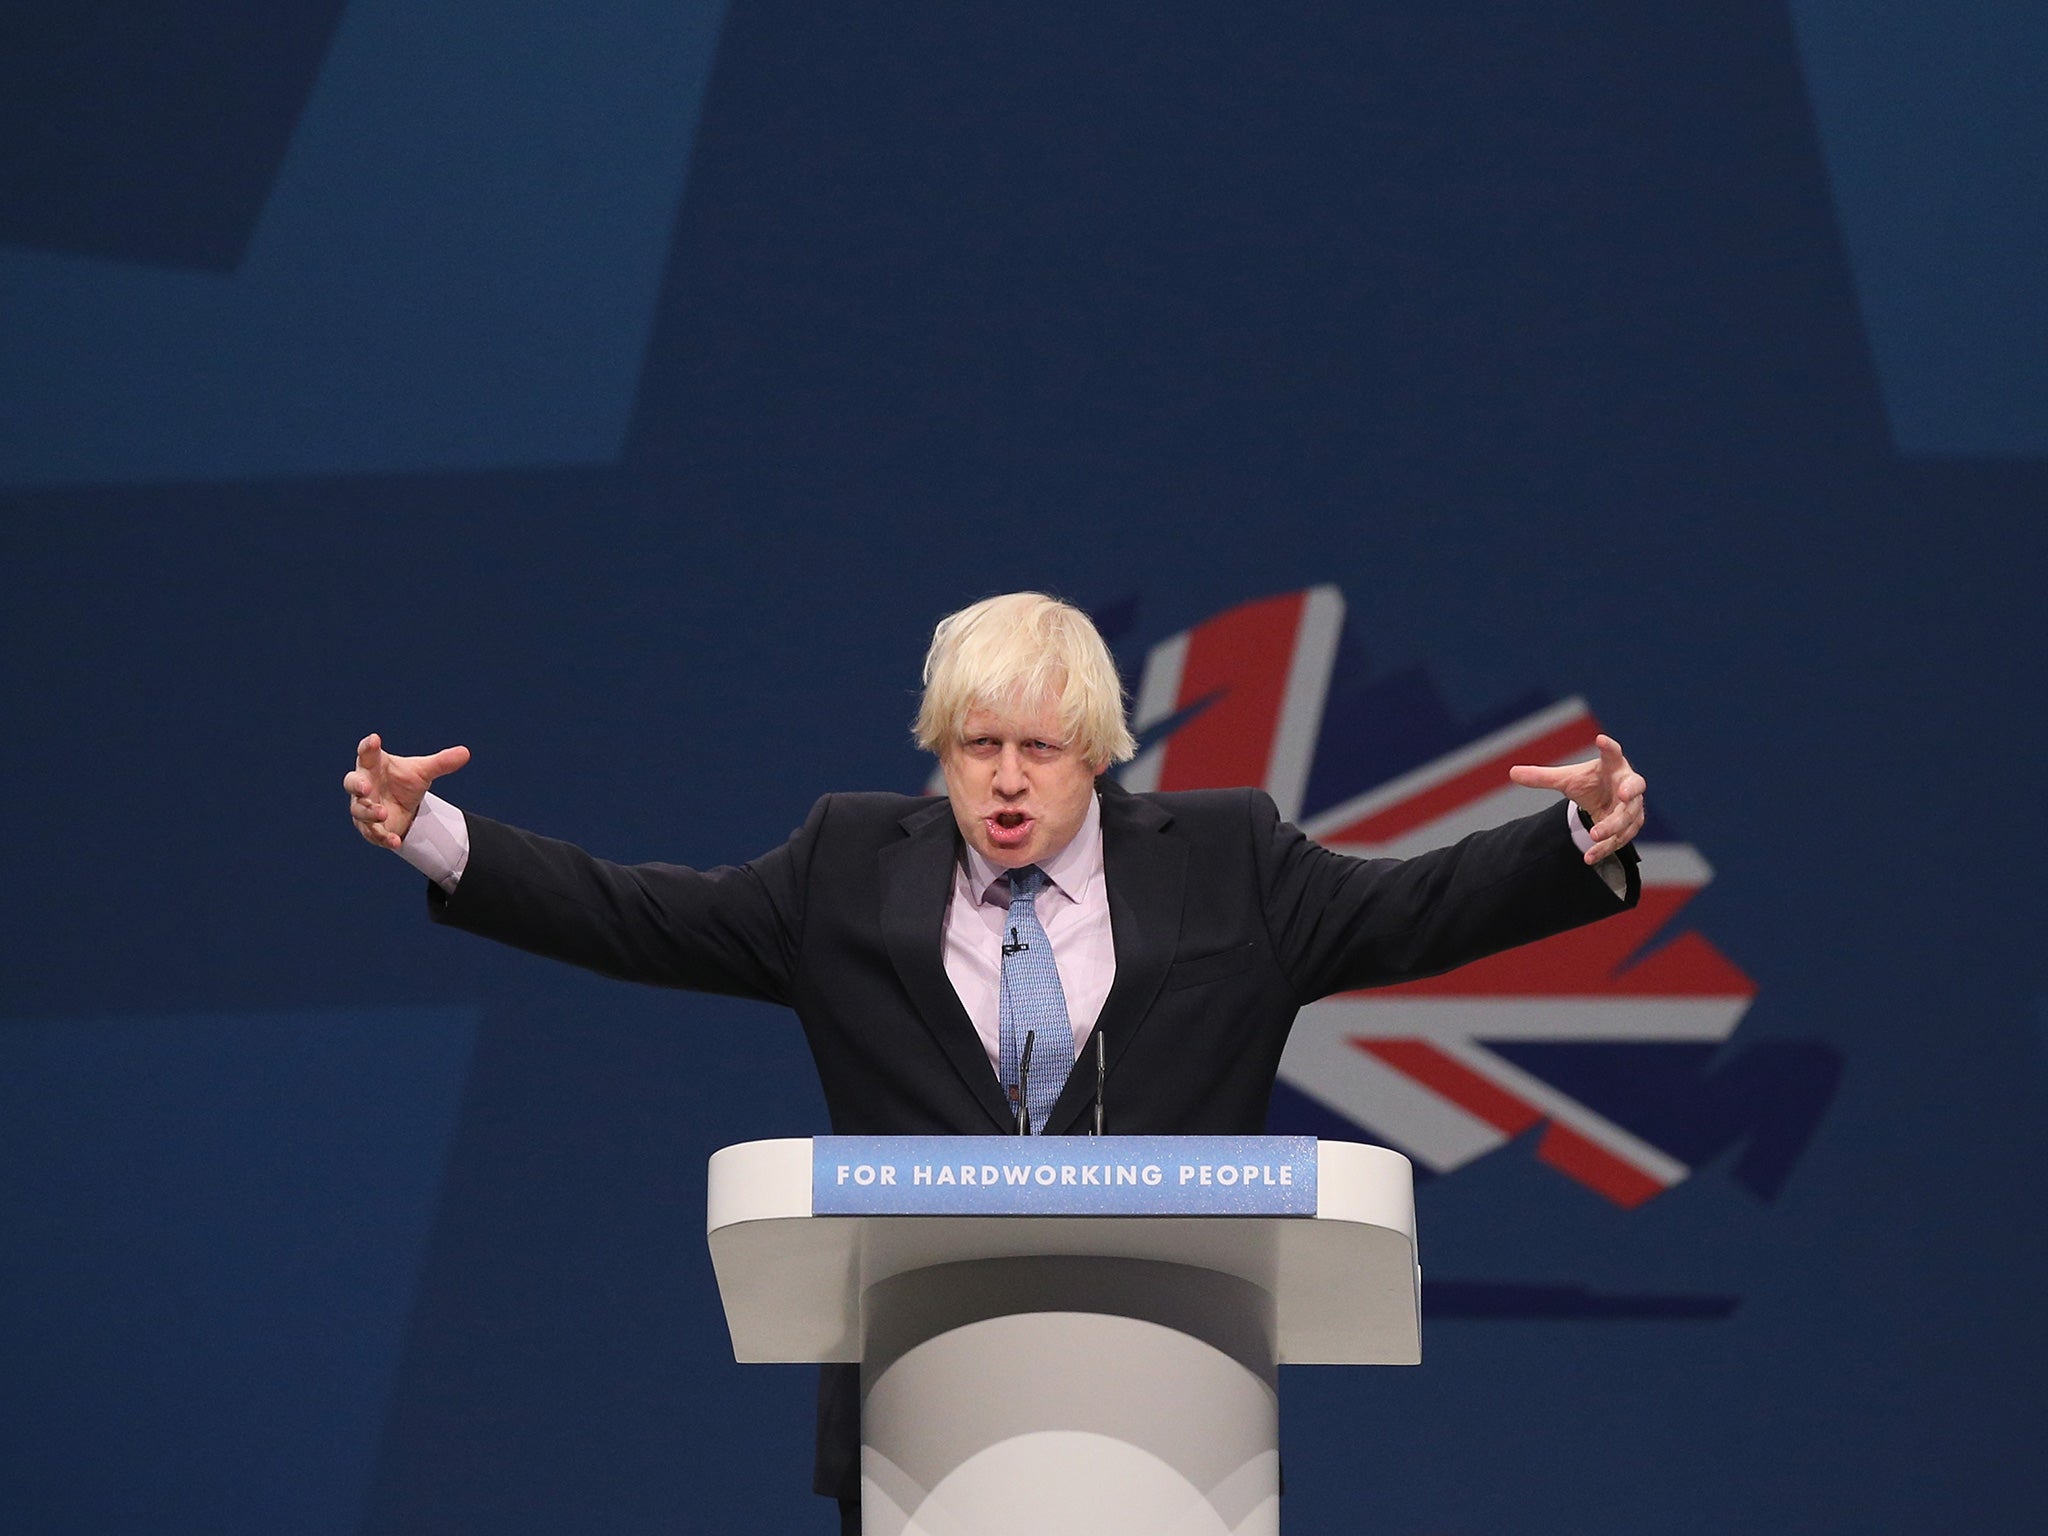 Boris said that it should down to Britain to decide how many immigrants the UK takes rather than the EU